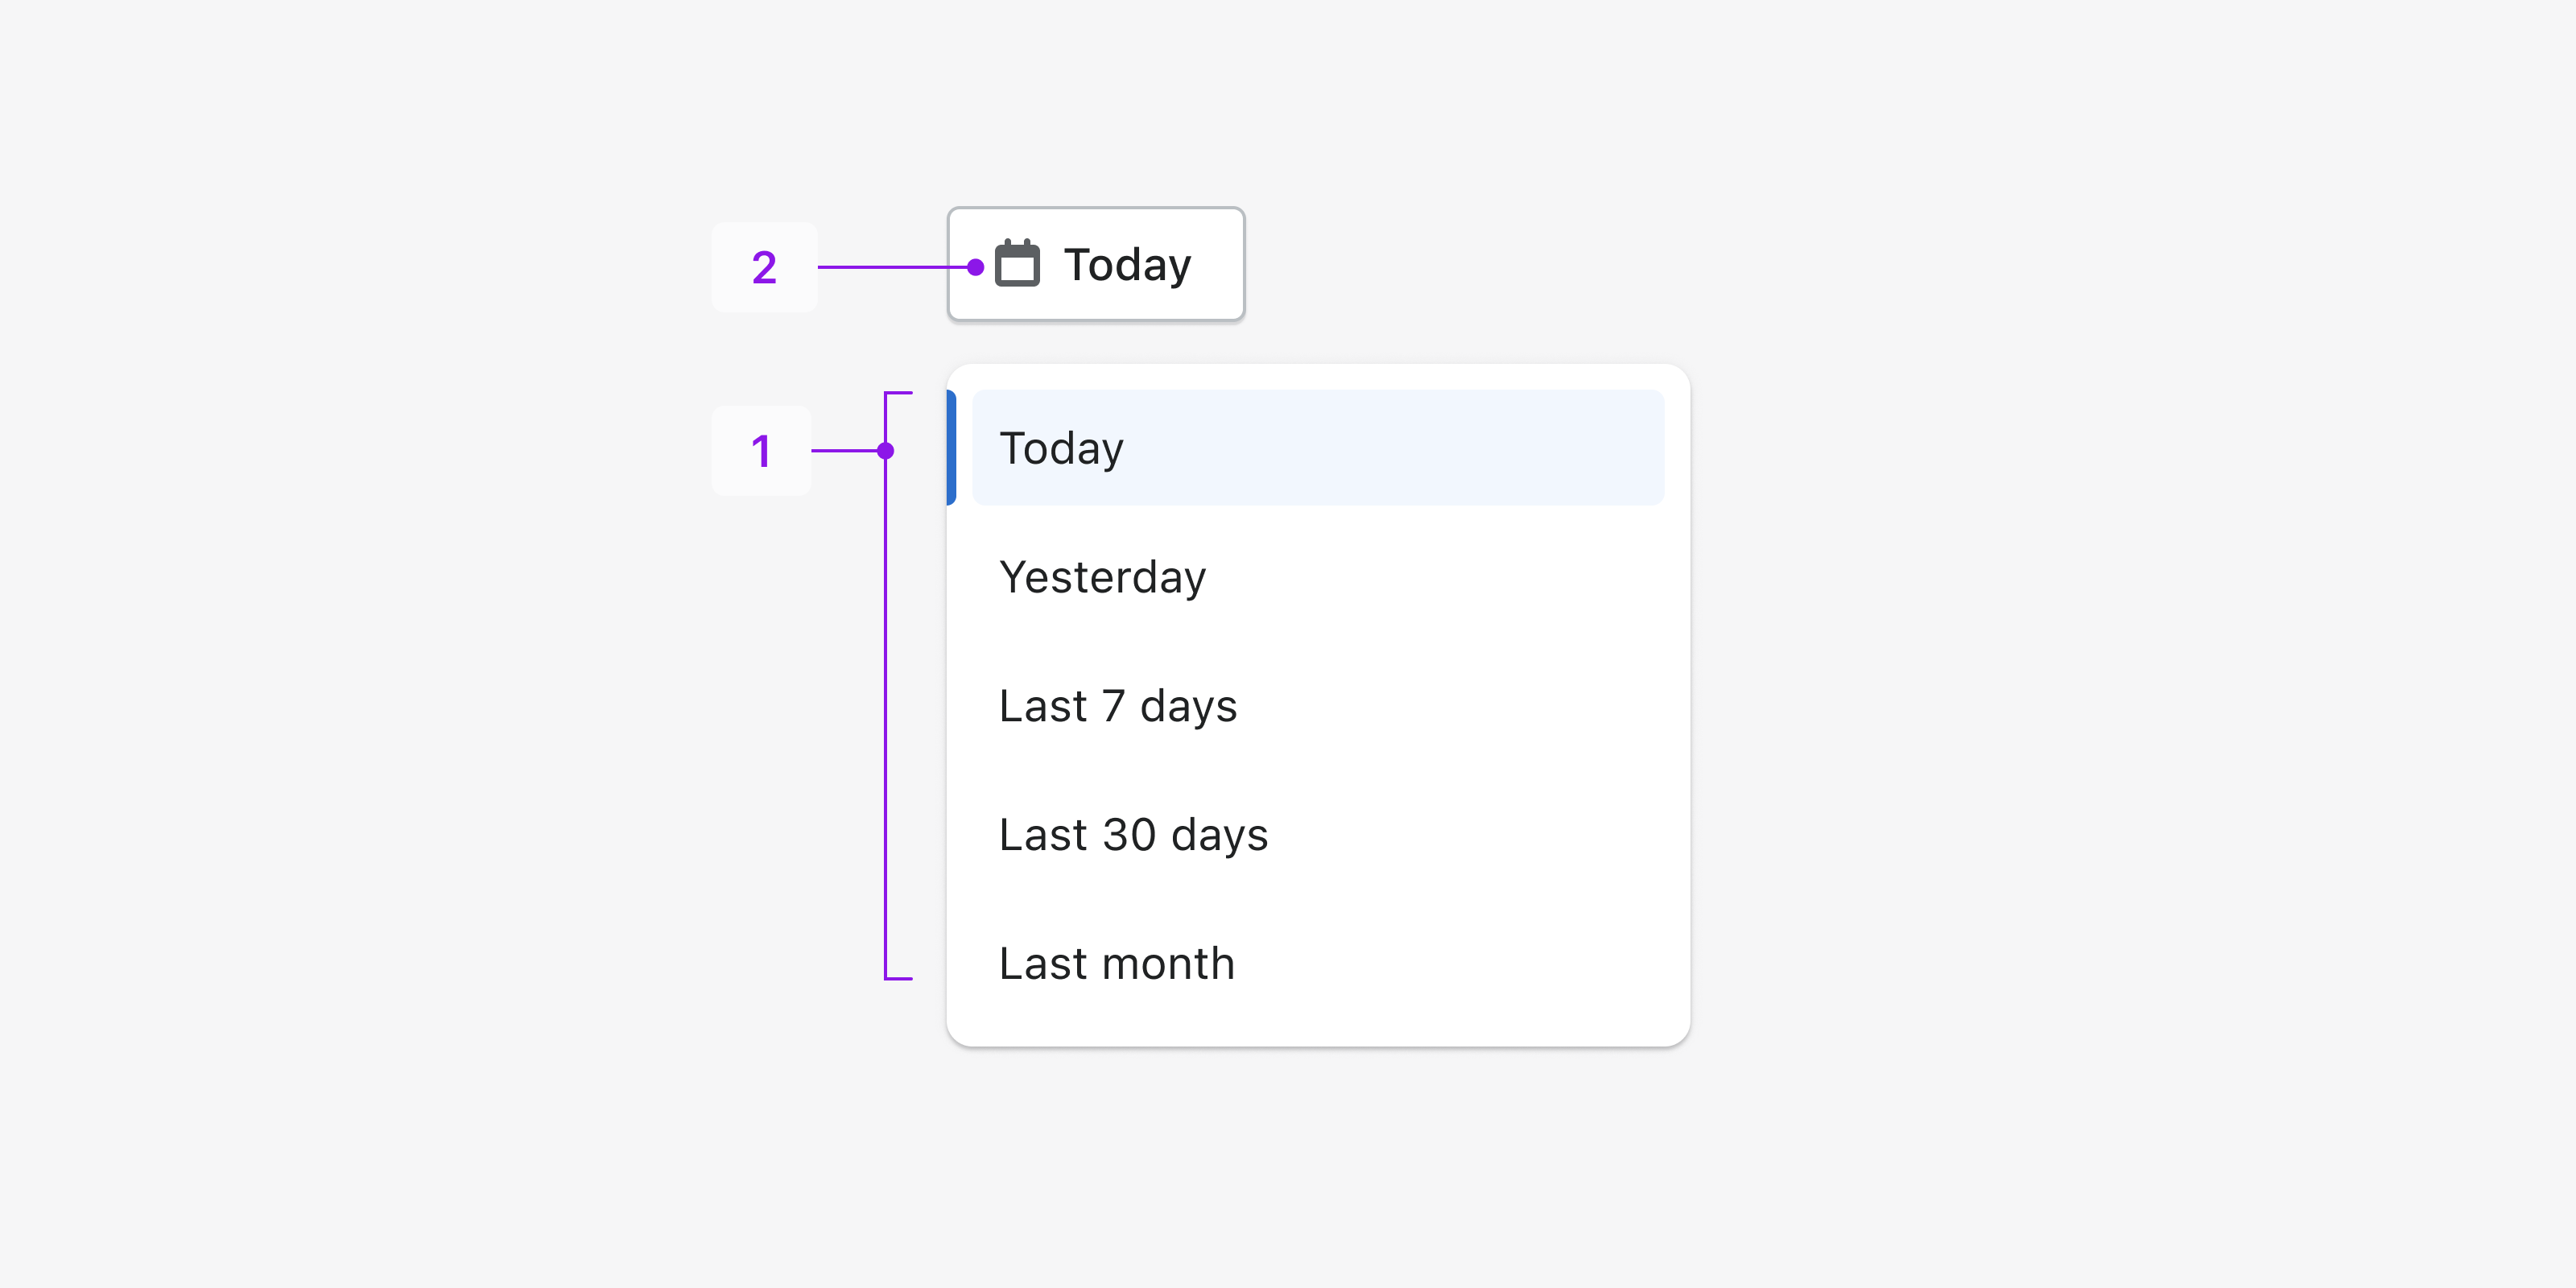 Option list with common suggested dates, such as “Today” and “Last 30 days”